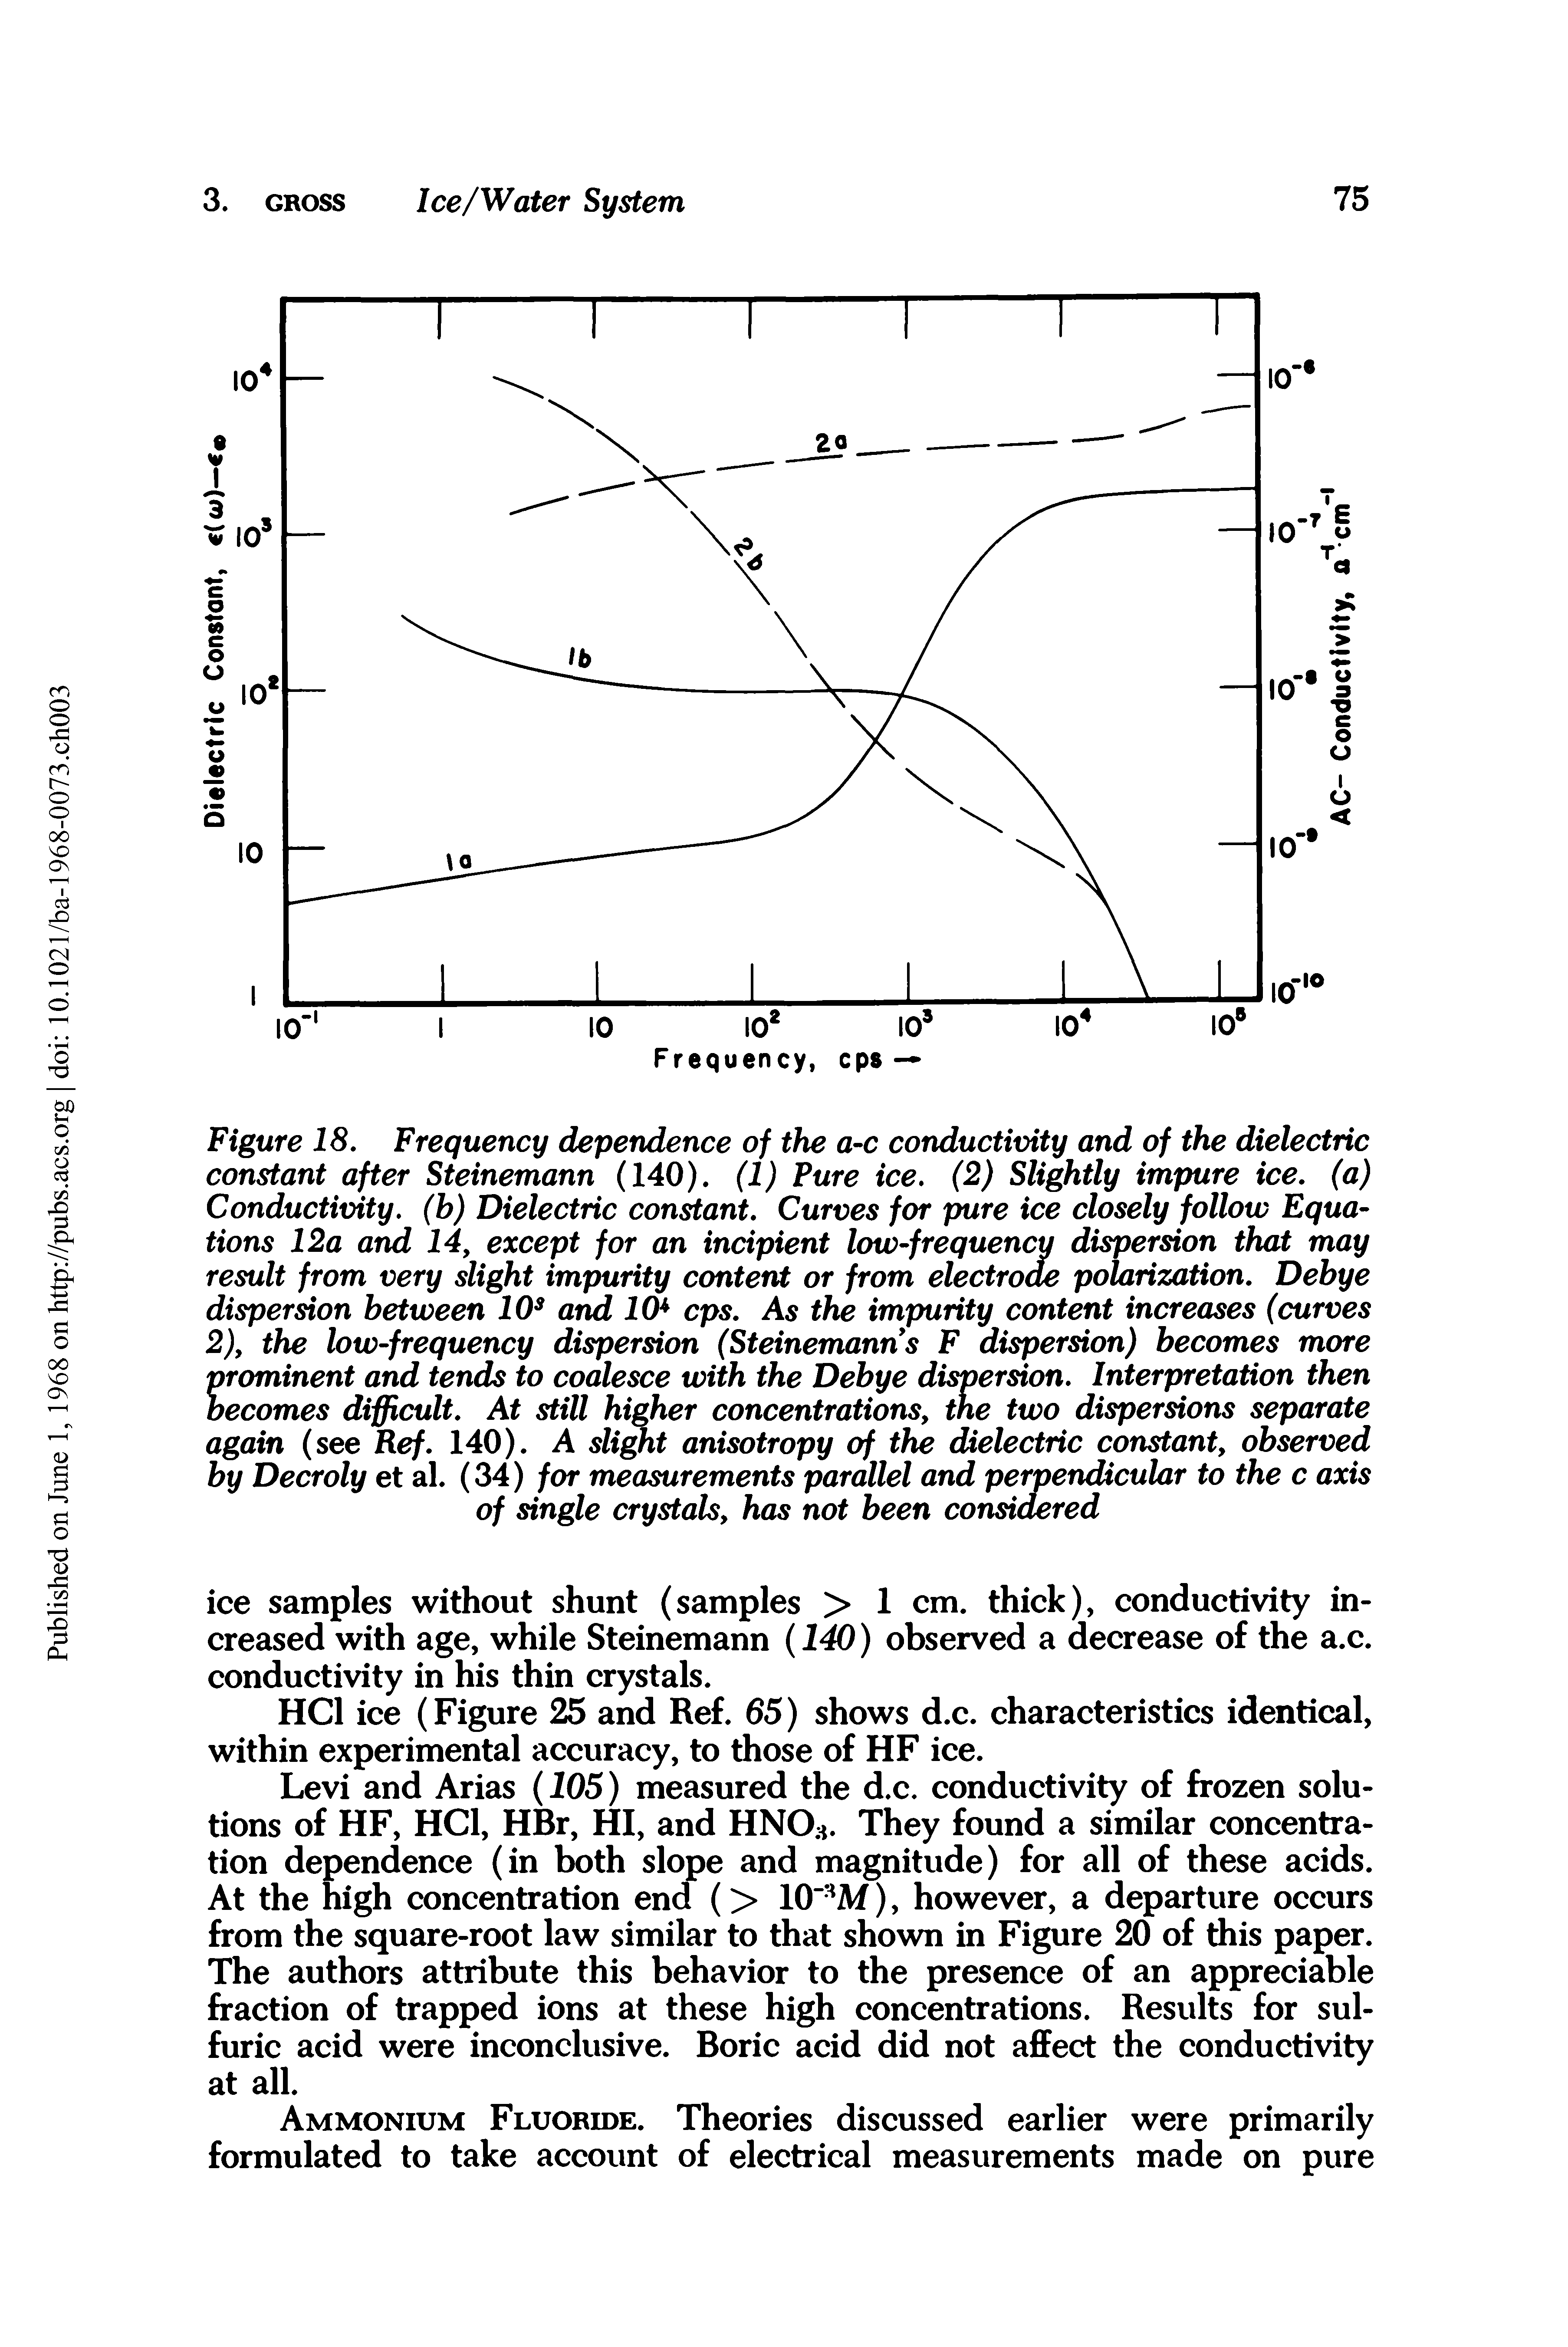 Figure 18, Frequency dependence of the a-c conductivity and of the dielectric constant after Steinemann (140), (1) Pure ice, (2) Slightly impure ice, (a) Conductivity, (b) Dielectric constant. Curves for pure ice closely follow Equations 12a and 14, except for an incipient low-frequency dispersion that may result from very slight impurity content or from electroae polarization. Debye dispersion between 10 and 10 cps. As the impurity content increases (curves 2), the low-frequency dispersion (Steinemann s F dispersion) becomes more prominent and tends to coalesce with the Debye dispersion. Interpretation then becomes difficult. At still higher concentrations, the two dispersions separate again (see Ref. 140). A slight anisotropy of the dielectric constant, observed by Decroly et al. (34) for measurements parallel and perpendicular to the c axis of single crystals, has not been considered...